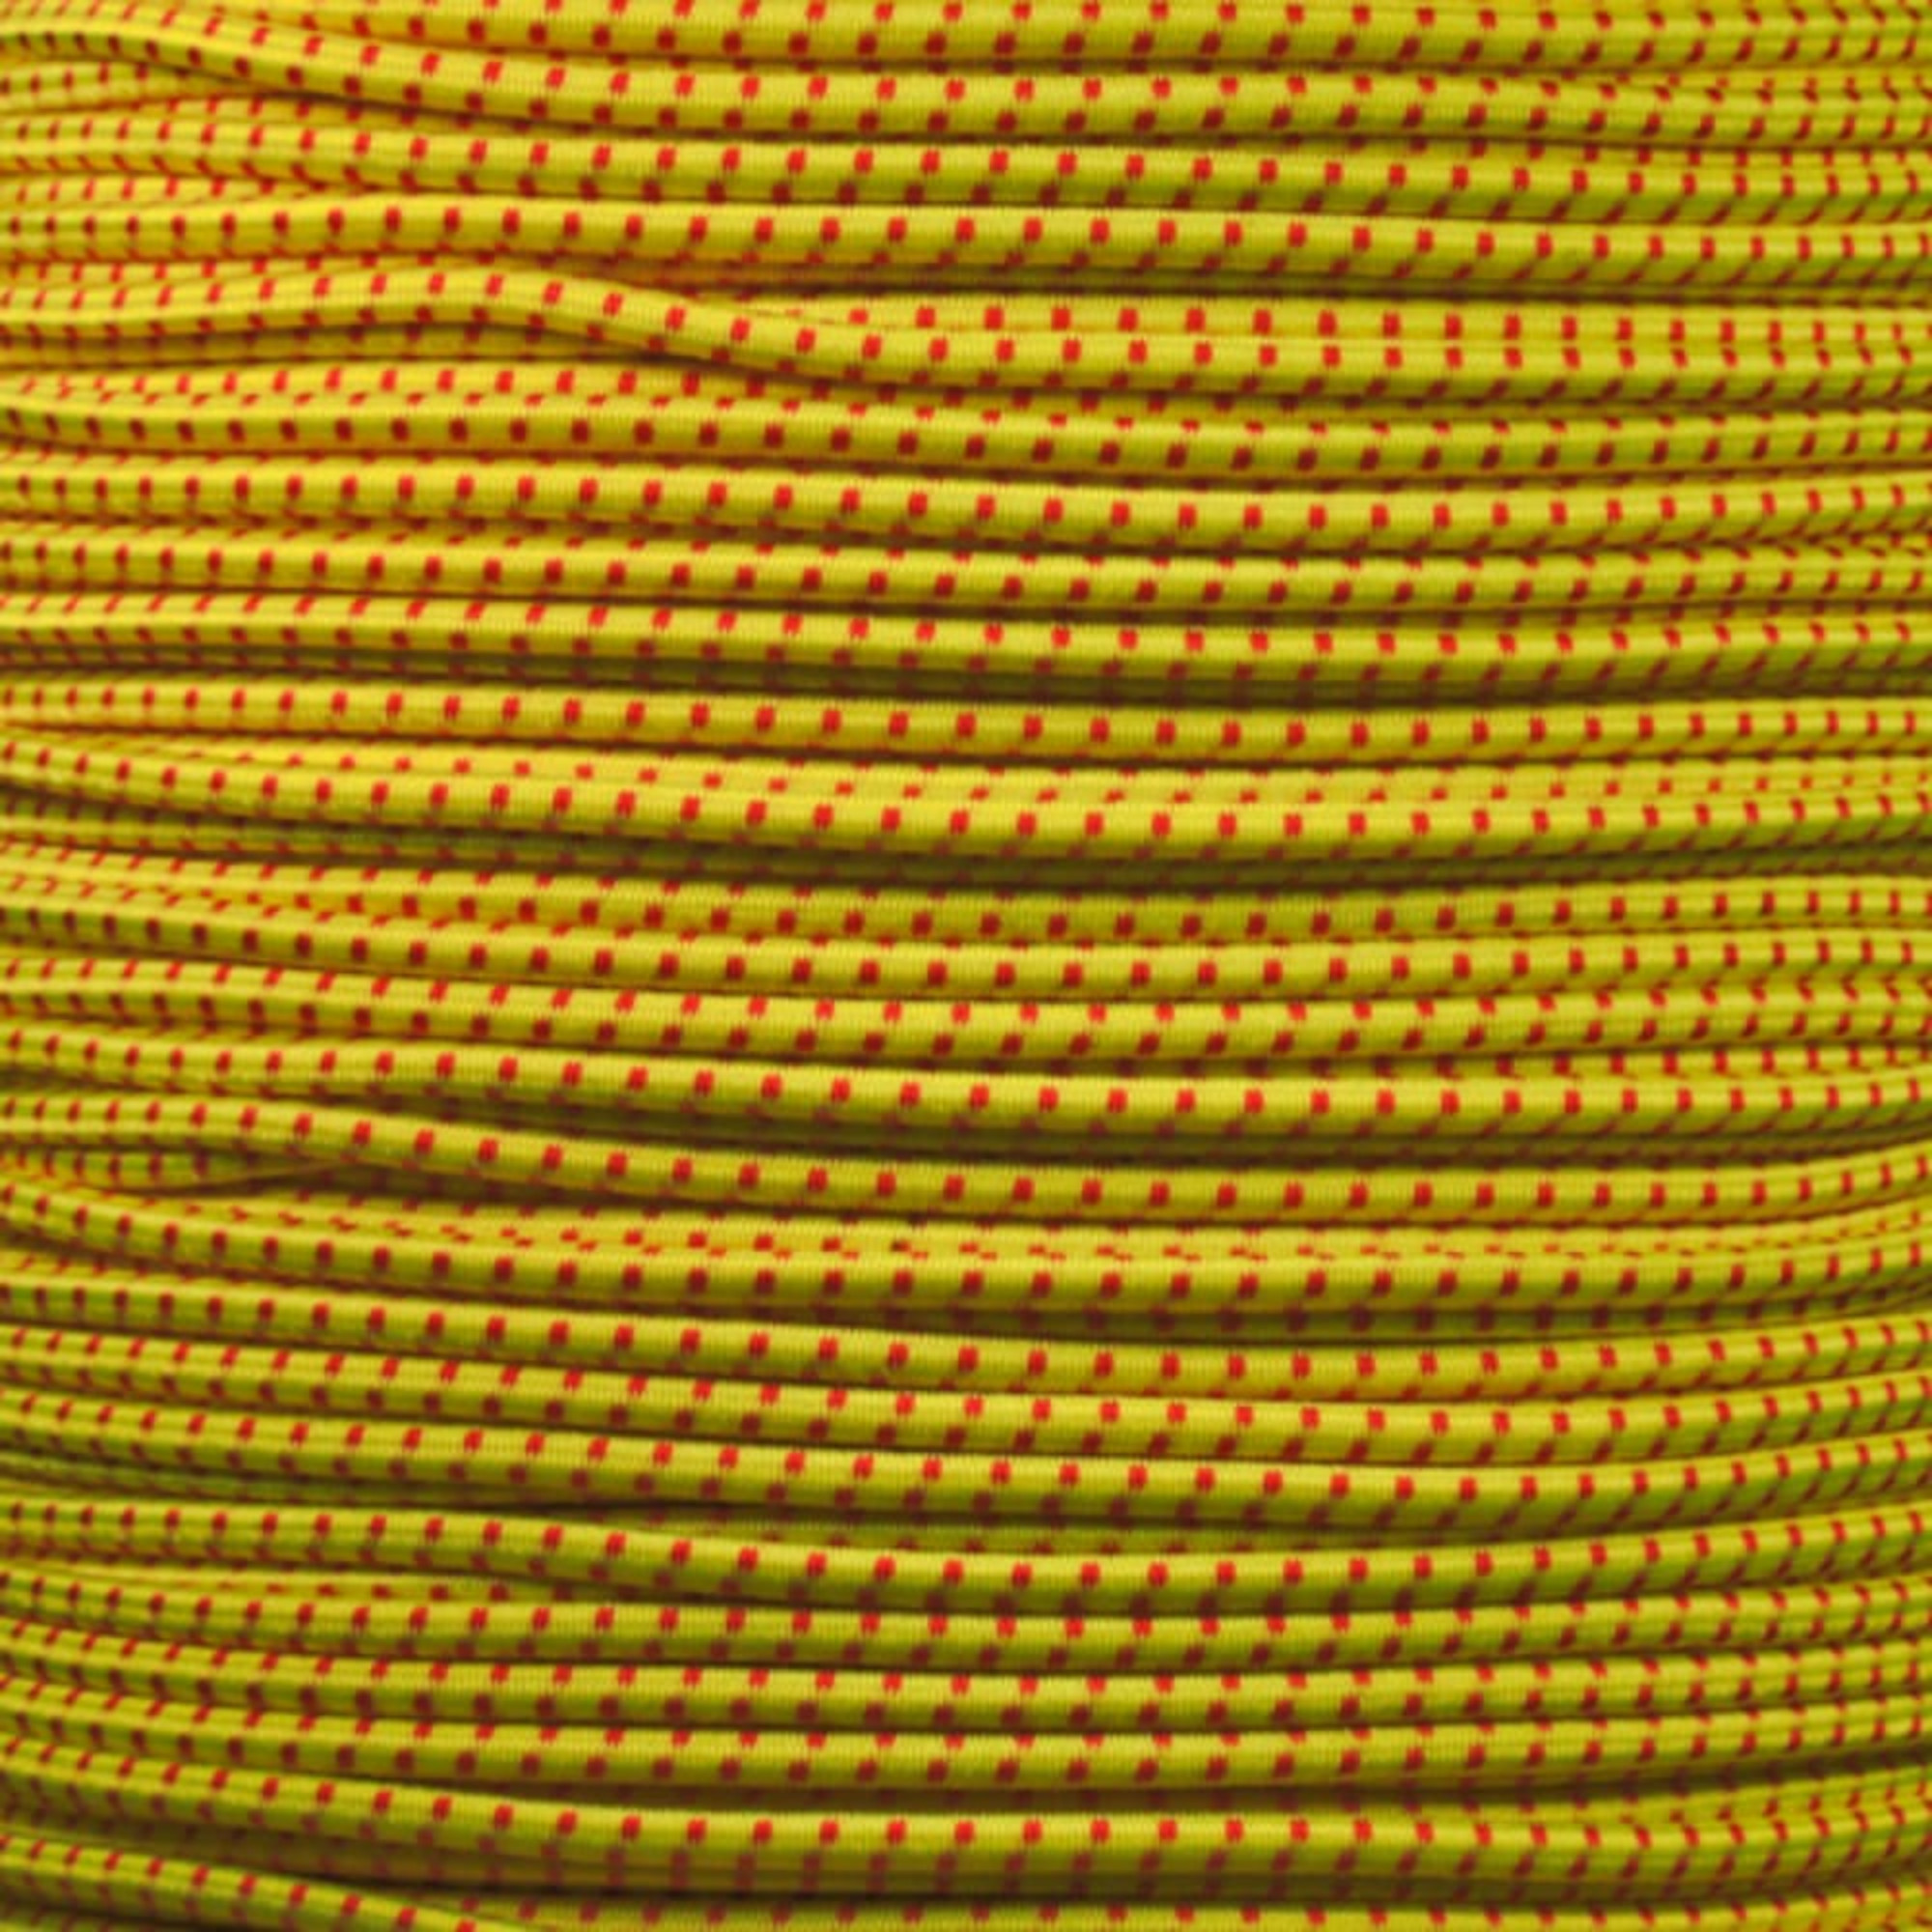 1/8" Shock Cord (Also Known as Bungee Cord) for Replacement, Repair, & Outdoors - Variety of Colors Available in 10, 25, & 50 Foot Lengths - image 1 of 1